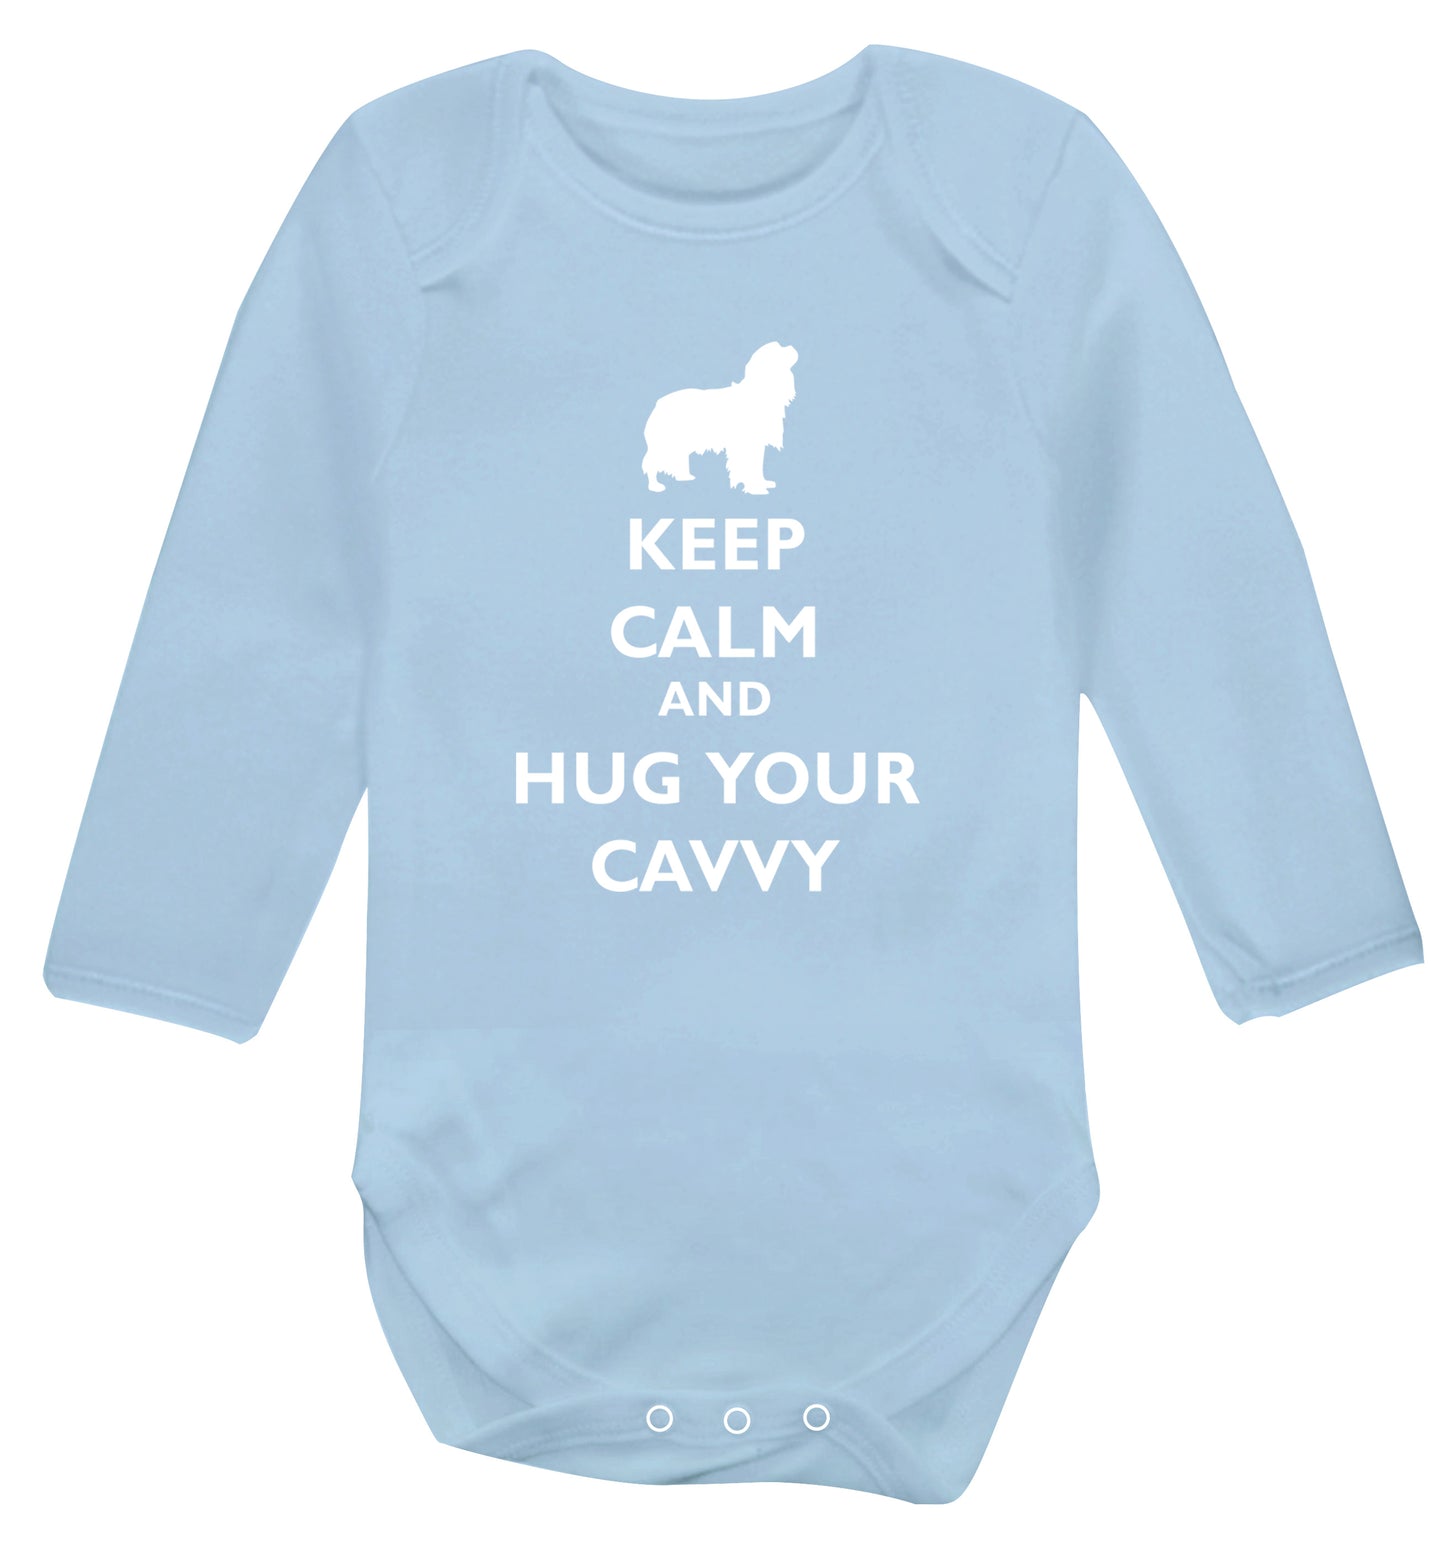 Keep calm and hug your cavvy Baby Vest long sleeved pale blue 6-12 months